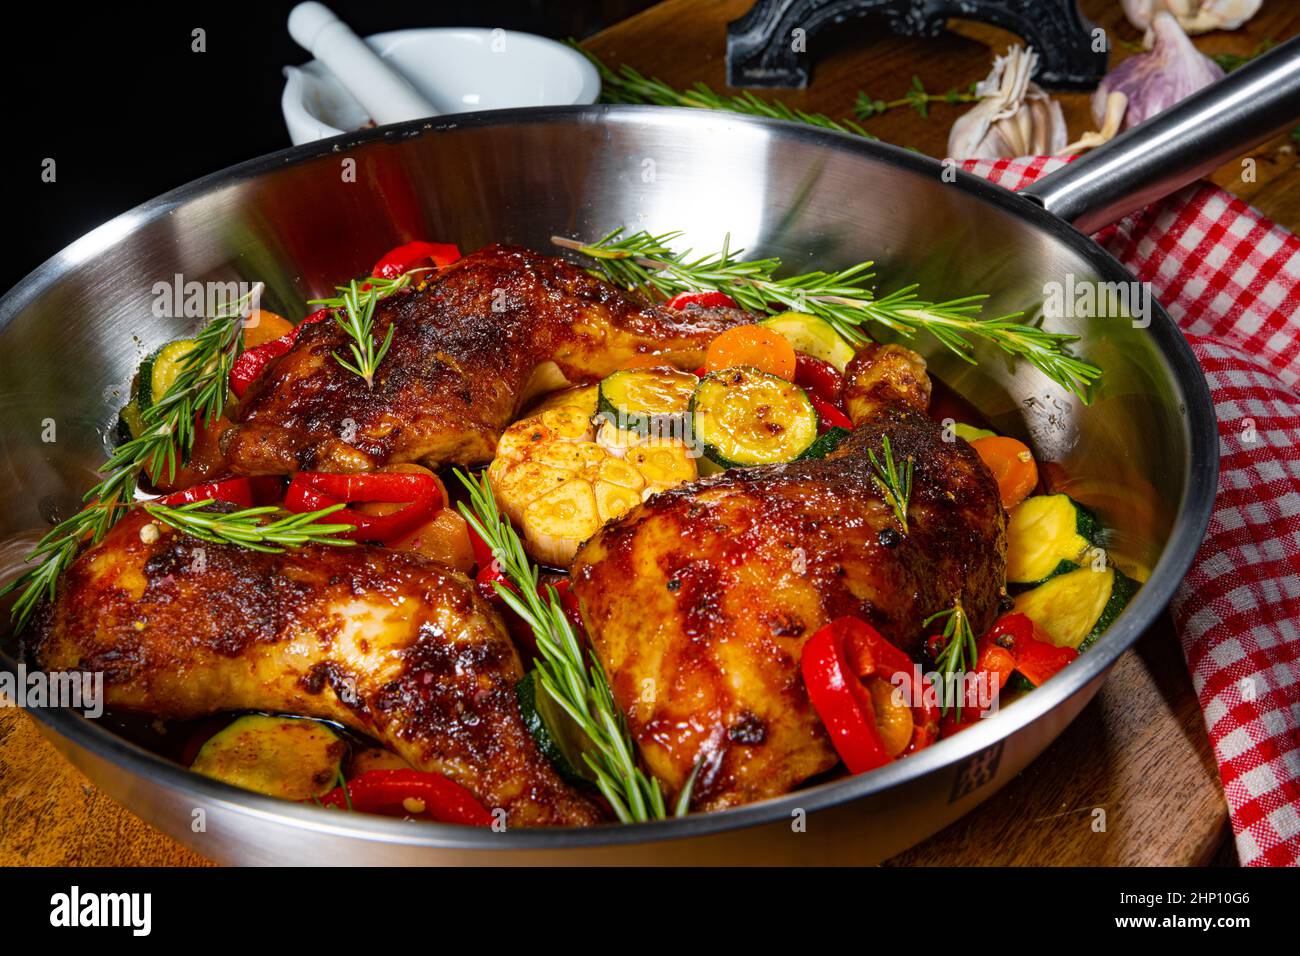 Fried chicken legs with various vegetables and spices Stock Photo